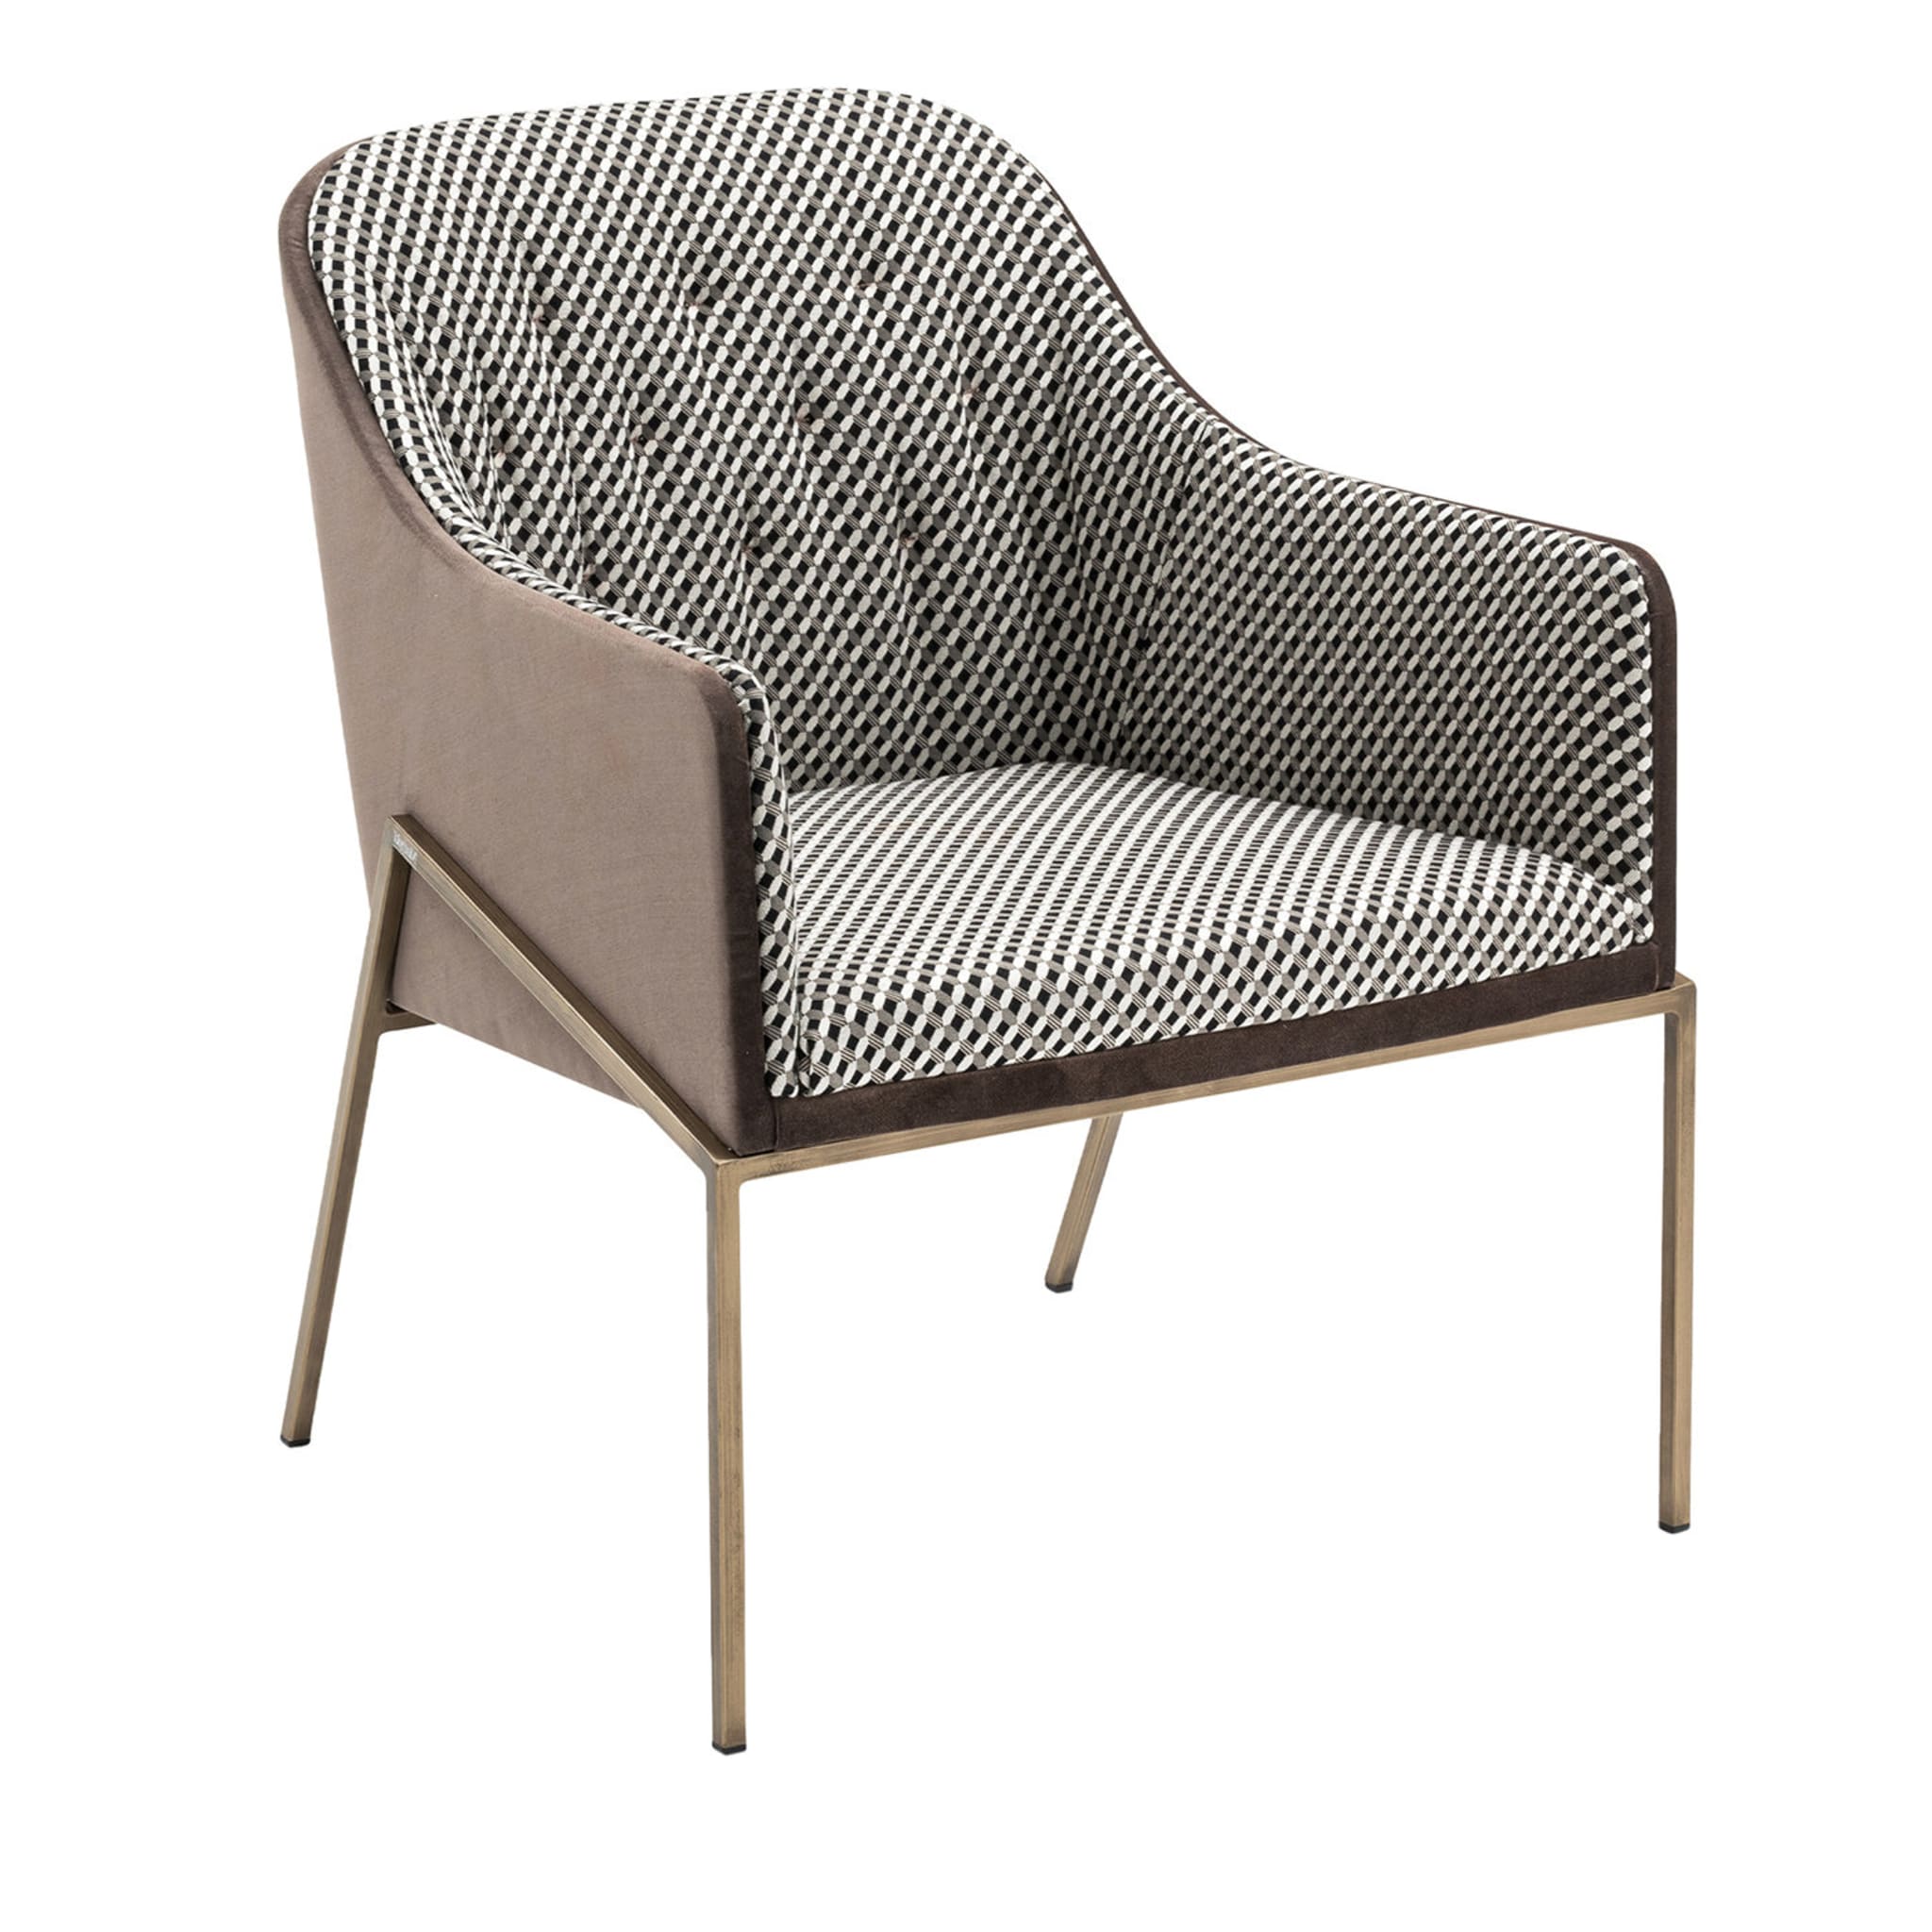 Kocca Patterned Armchair - Main view